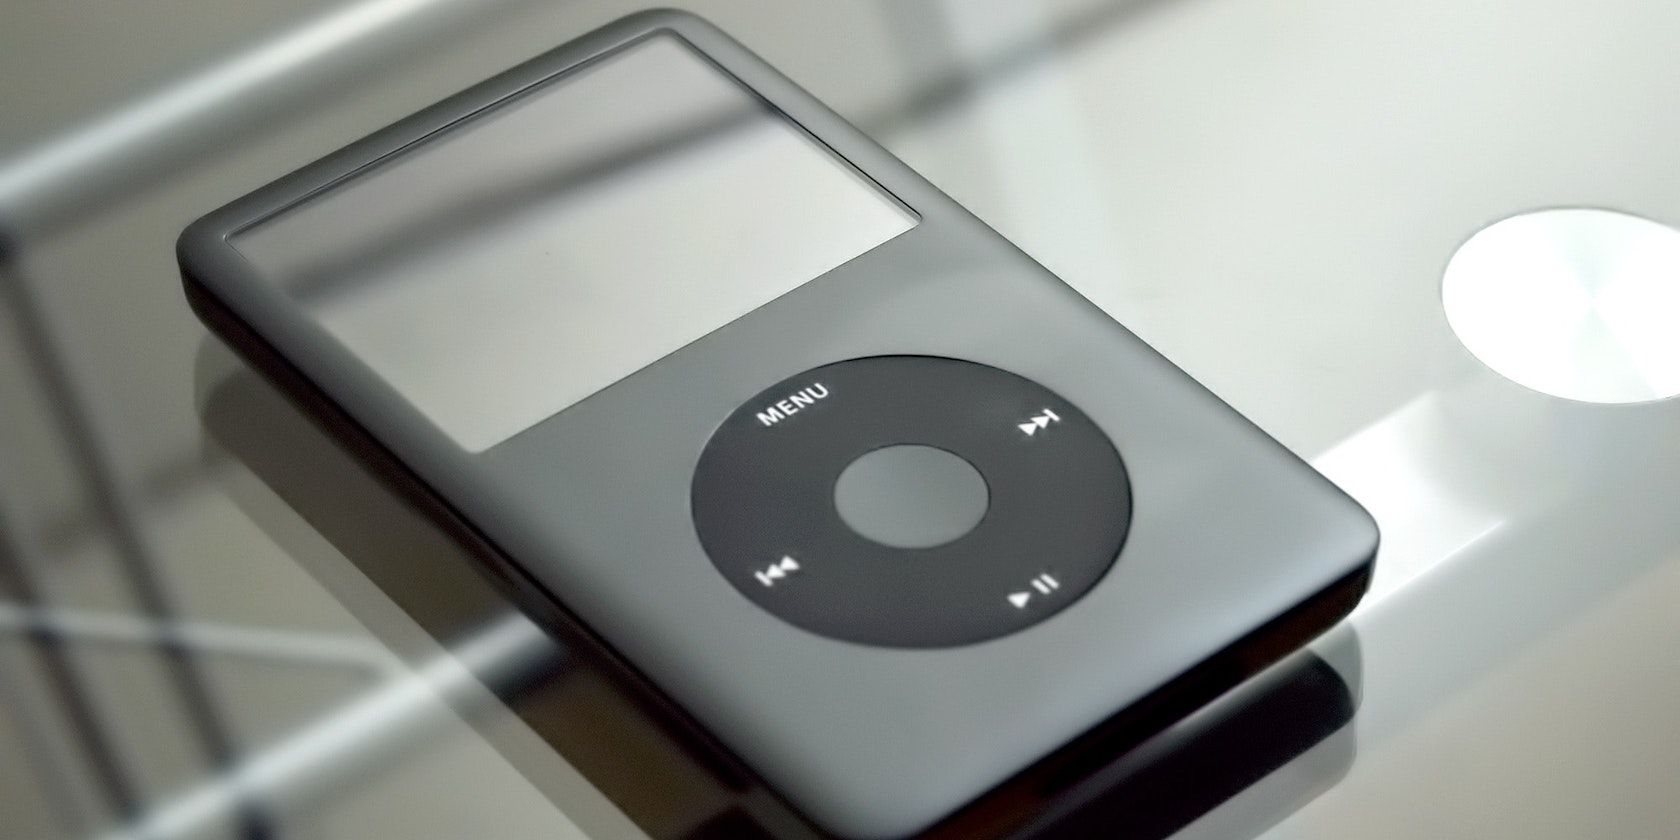 iPod Classic lying on a table